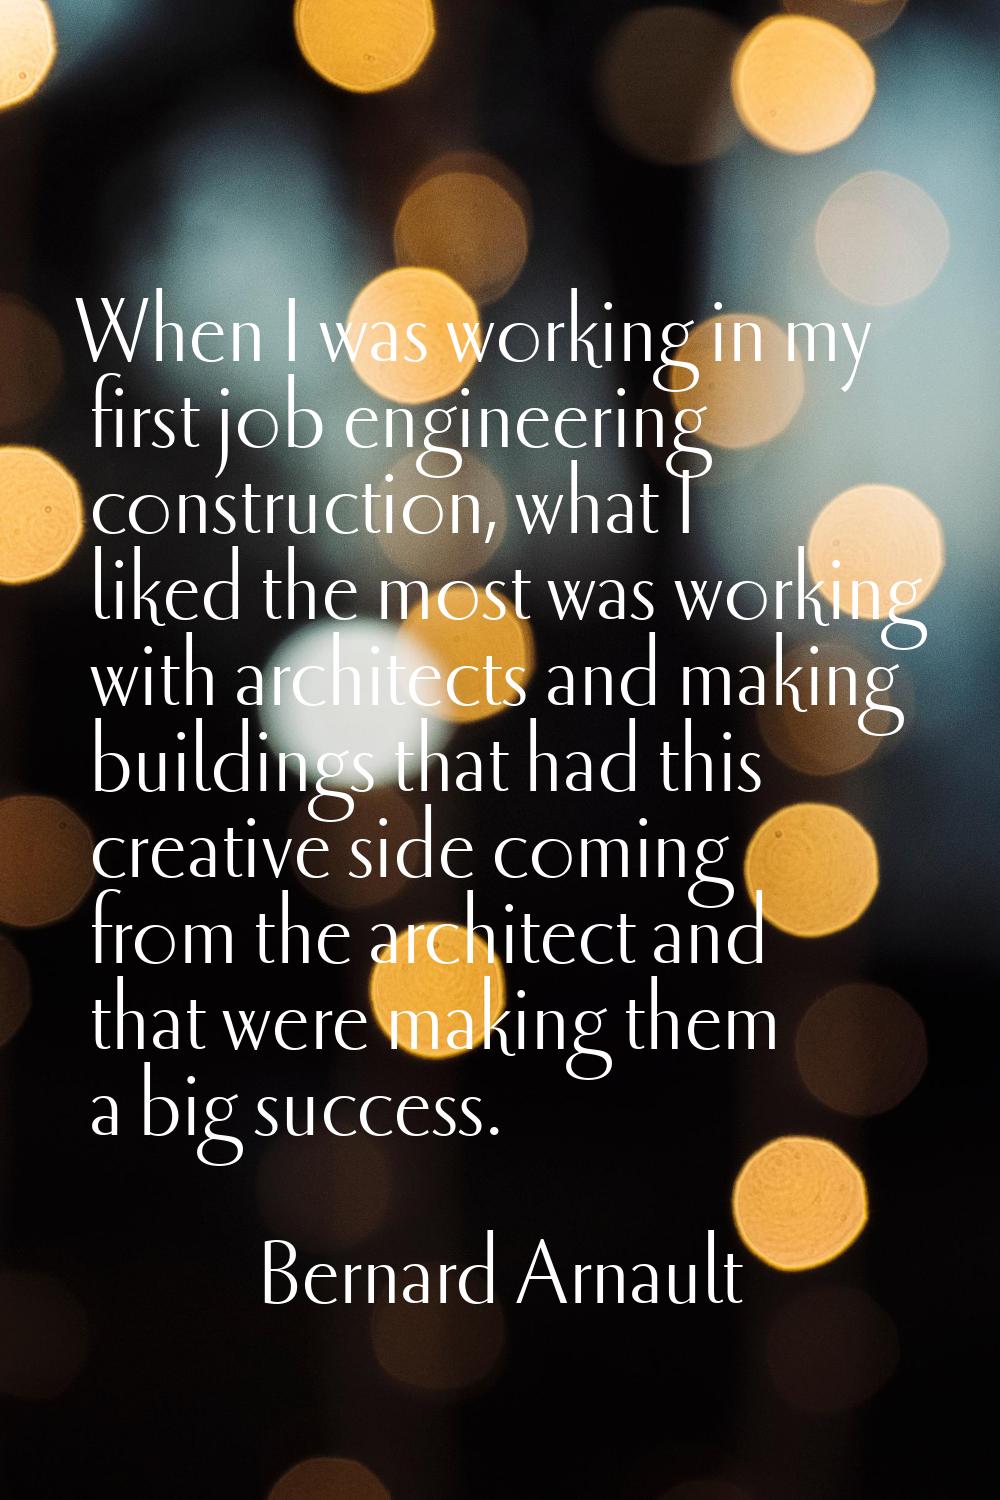 When I was working in my first job engineering construction, what I liked the most was working with